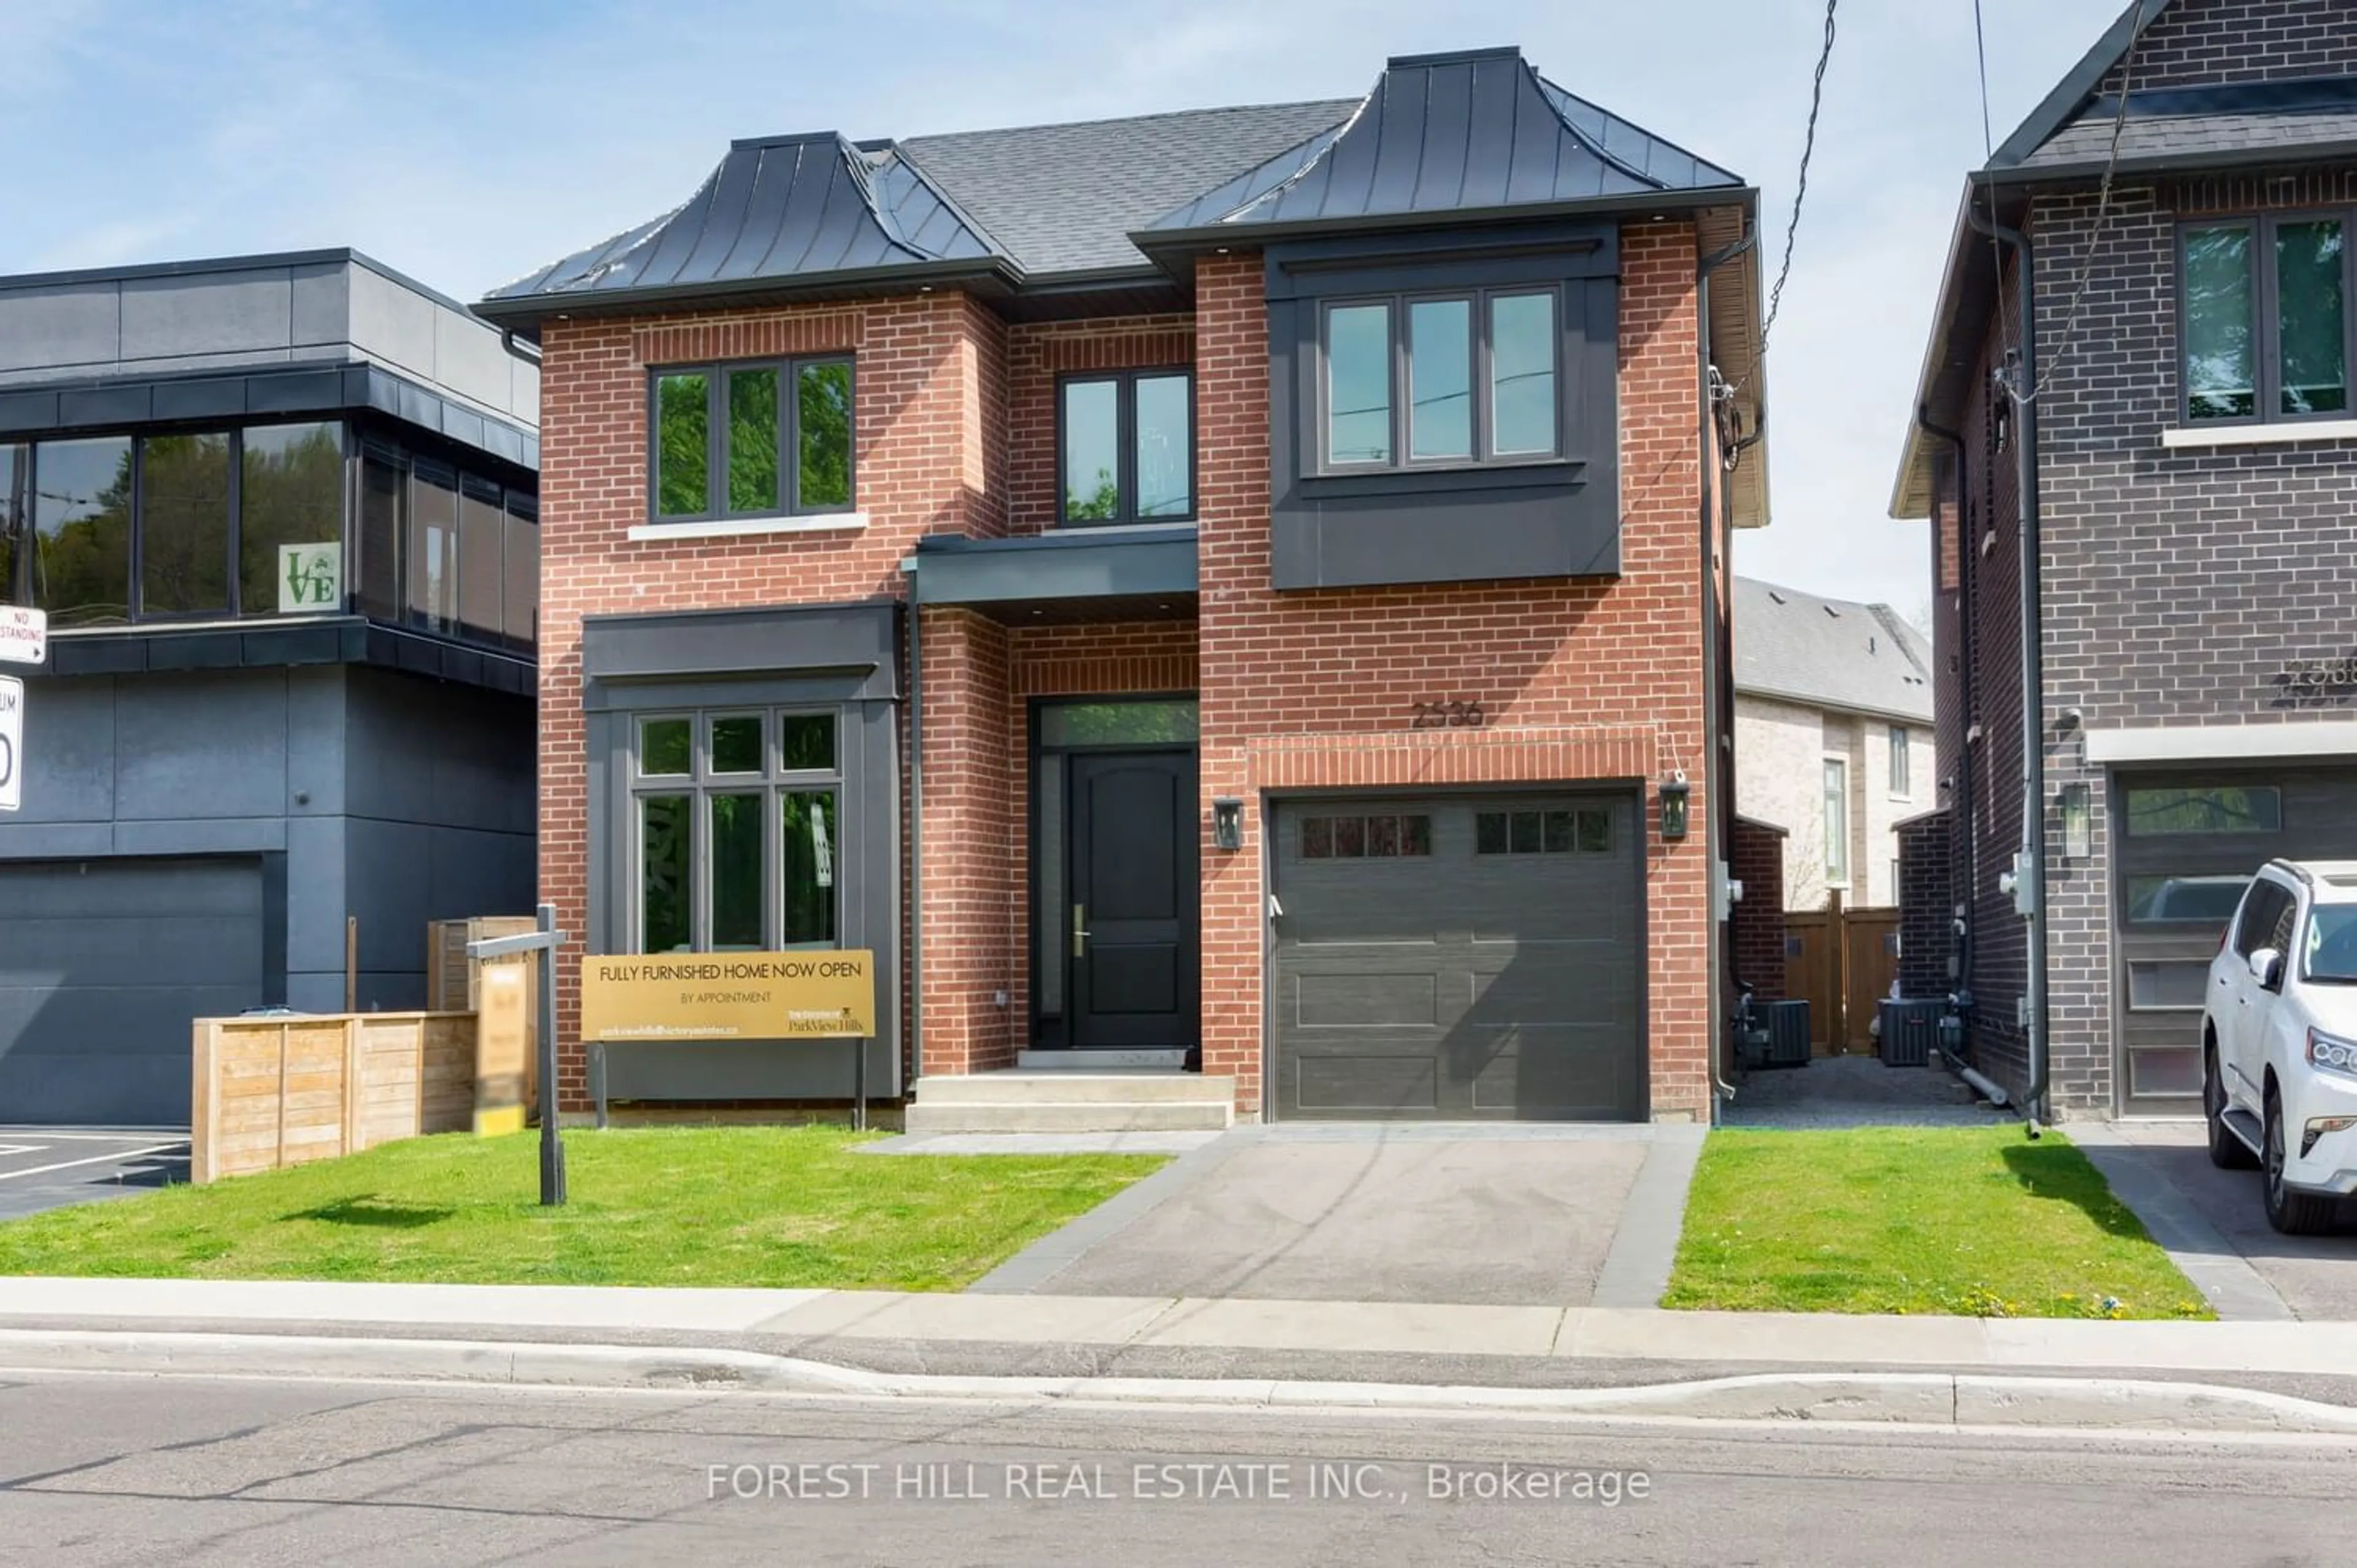 Home with brick exterior material for 2536 St Clair Ave, Toronto Ontario M4B 1M1